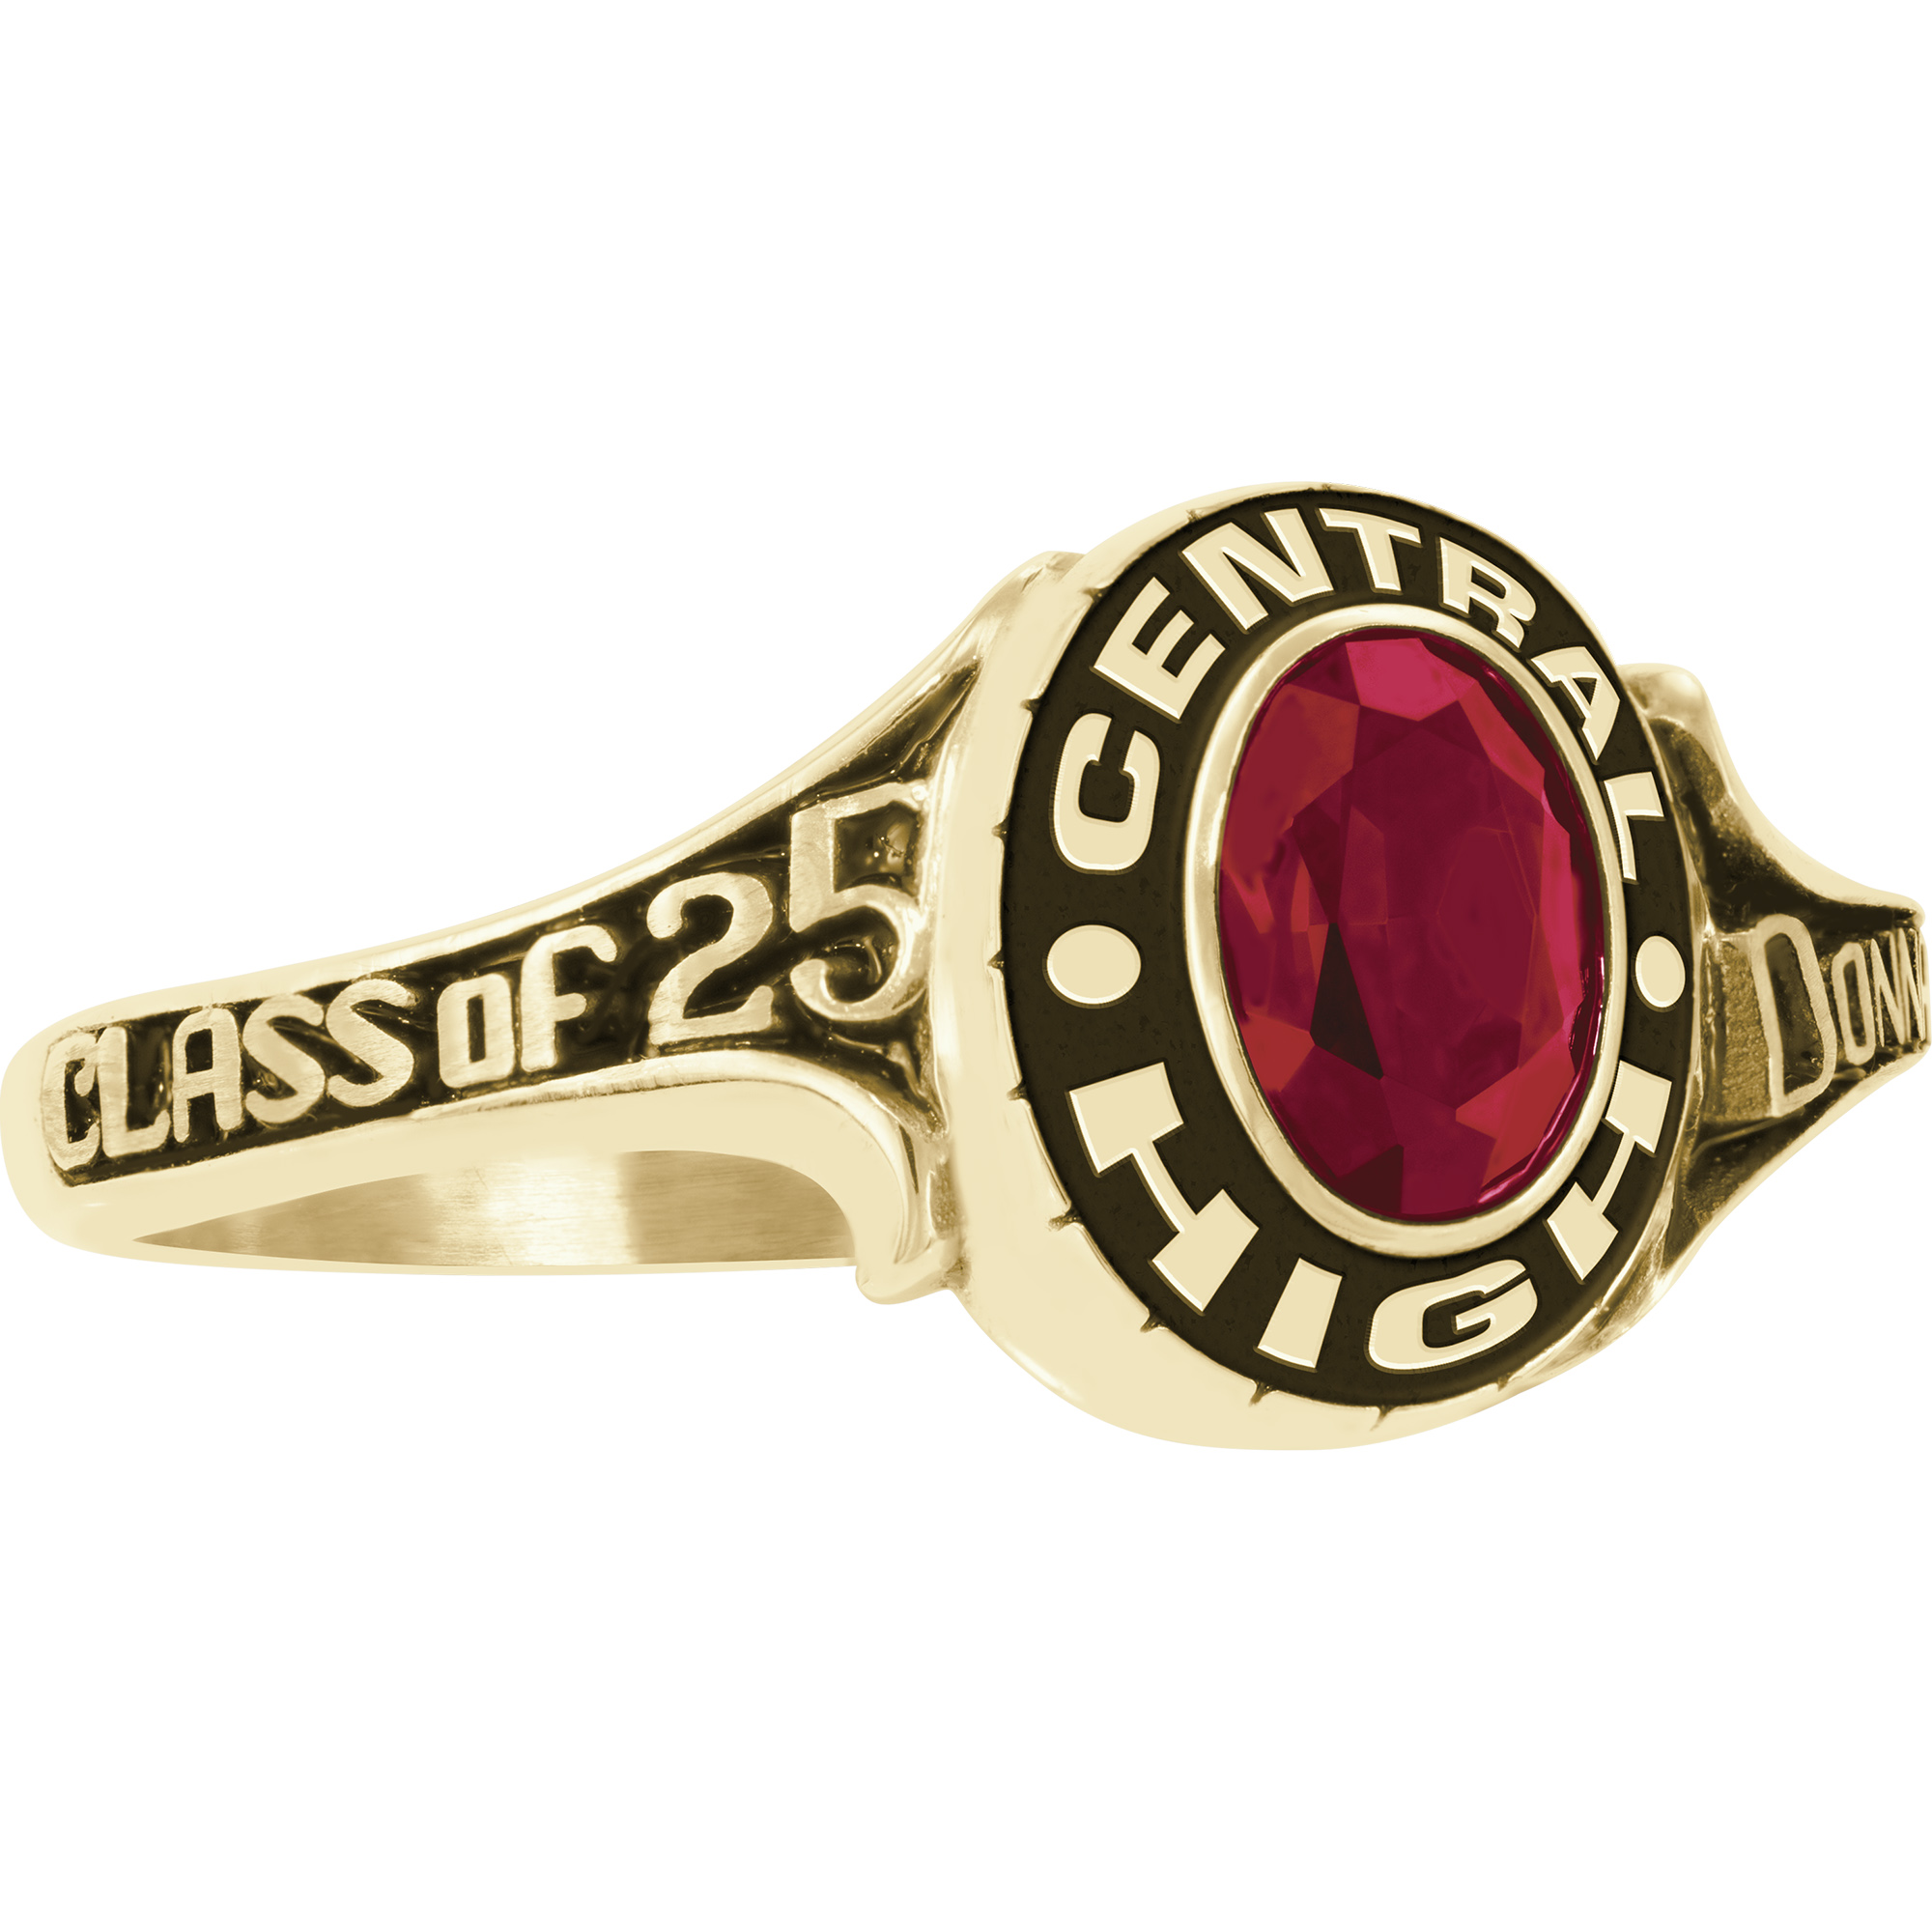 Personalized Women's Name Fashion Class Ring available in Valadium ...